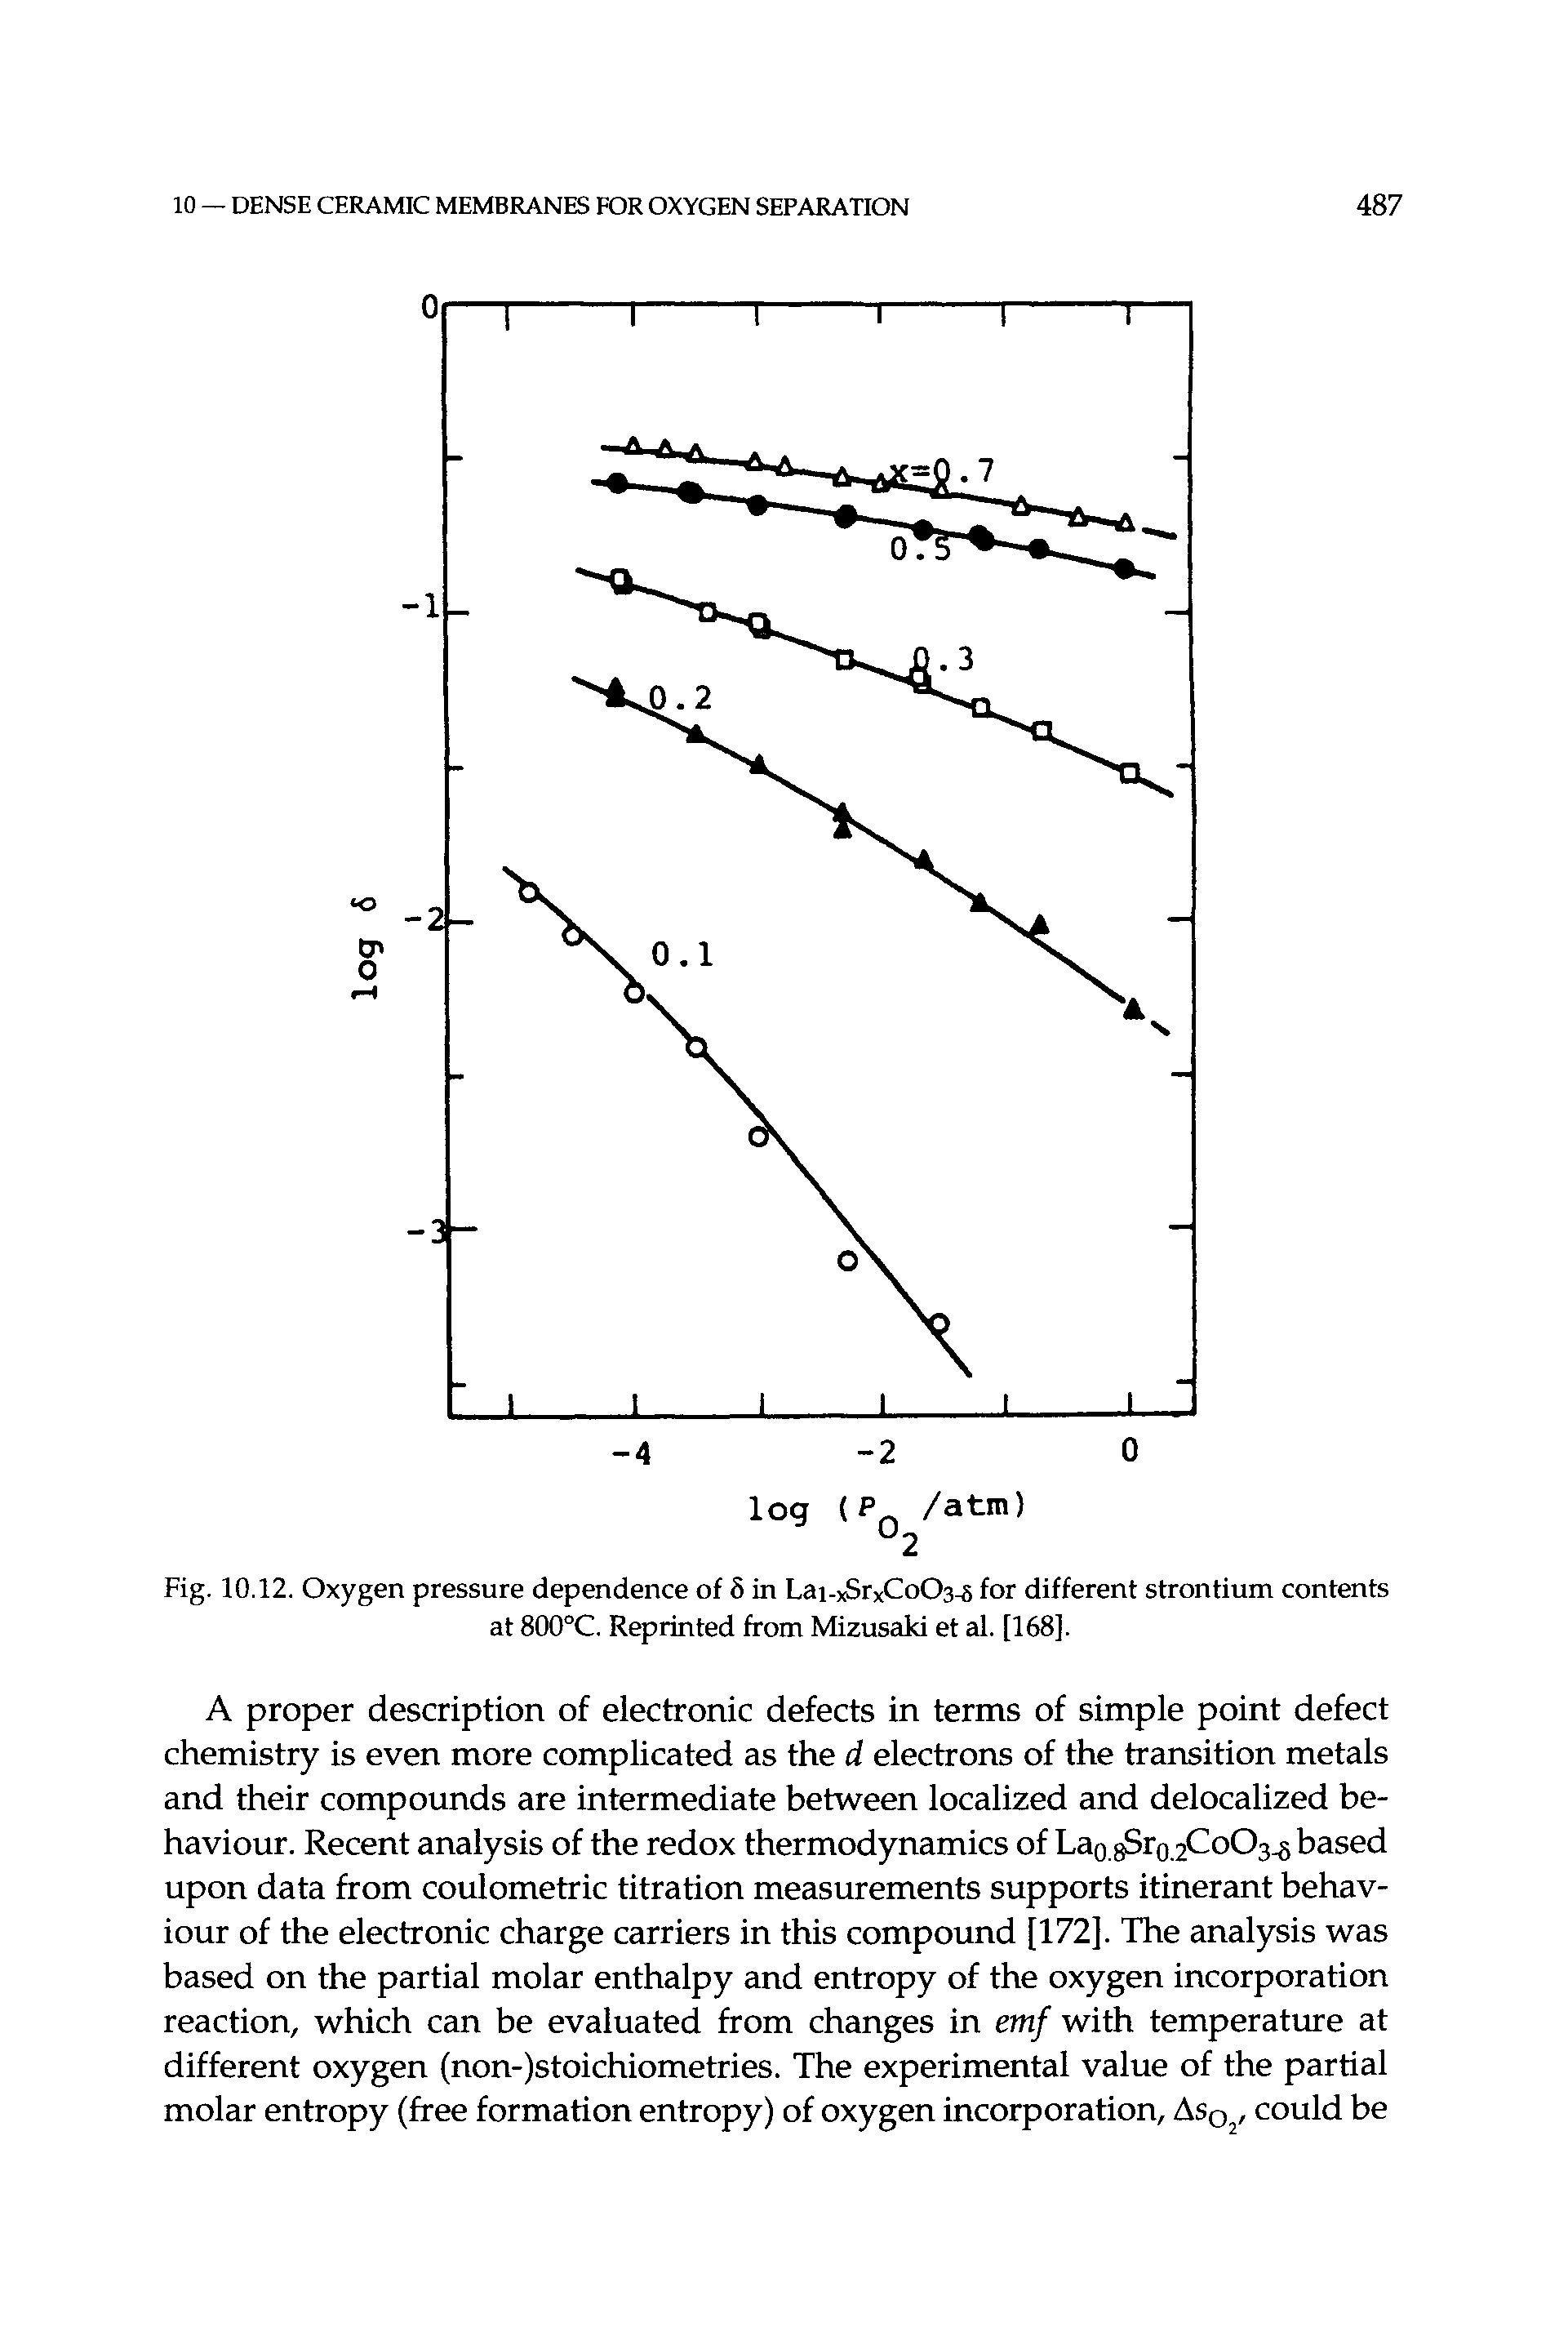 Fig. 10.12. Oxygen pressure dependence of 5 in Lai-xSrxCoOs-s for different strontium contents at 800°C. Reprinted from Mizusaki et al. [168].